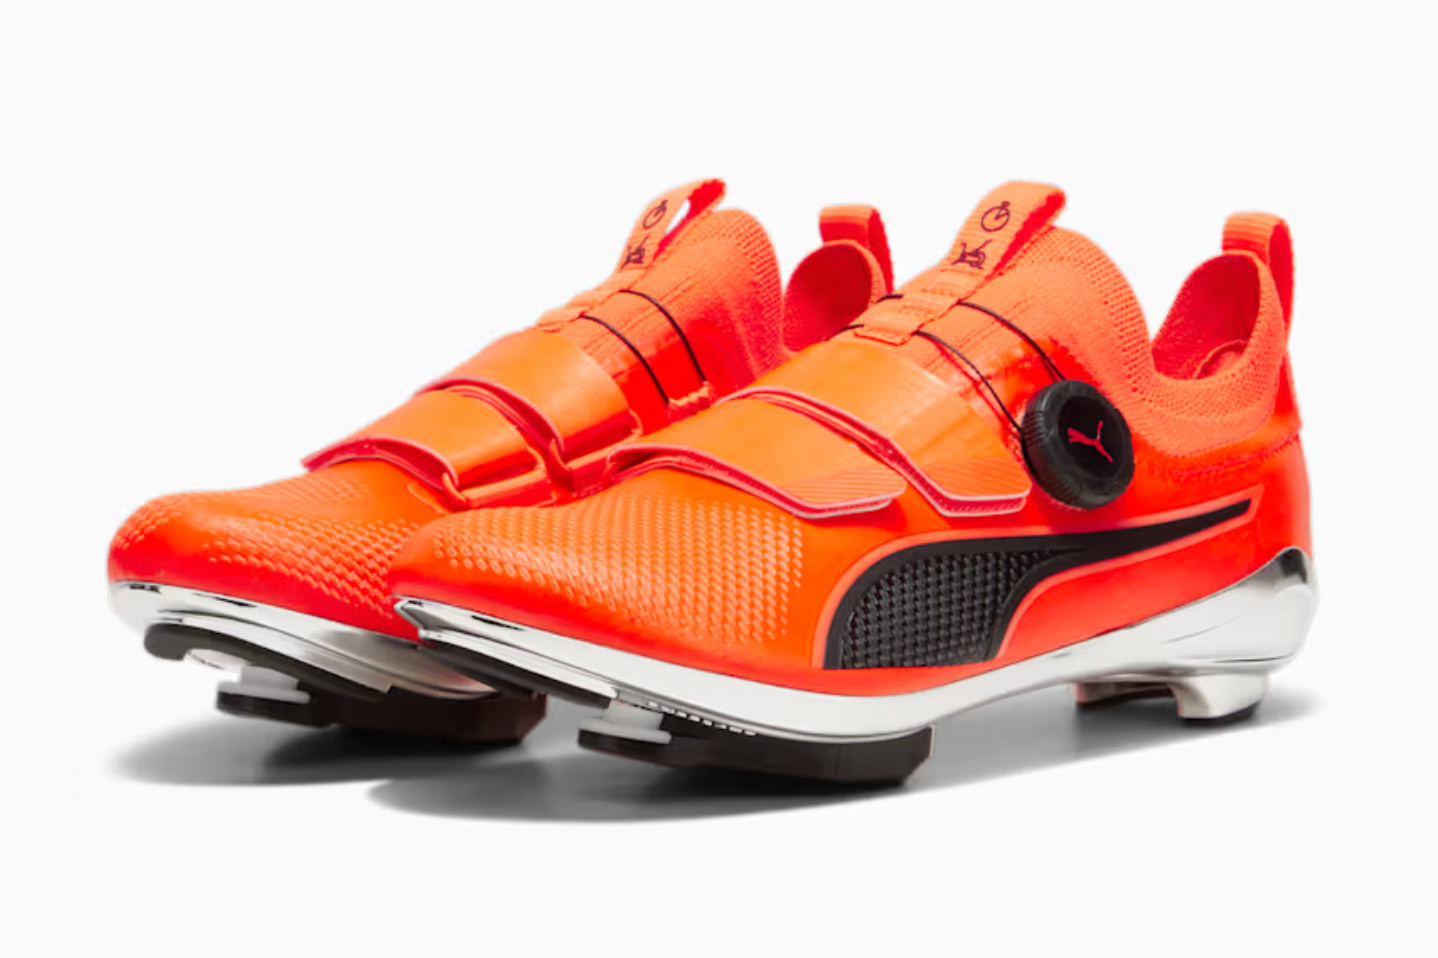 Where to Buy the Alex Toussaint x Puma Pwrspin Indoor Cycling Shoe